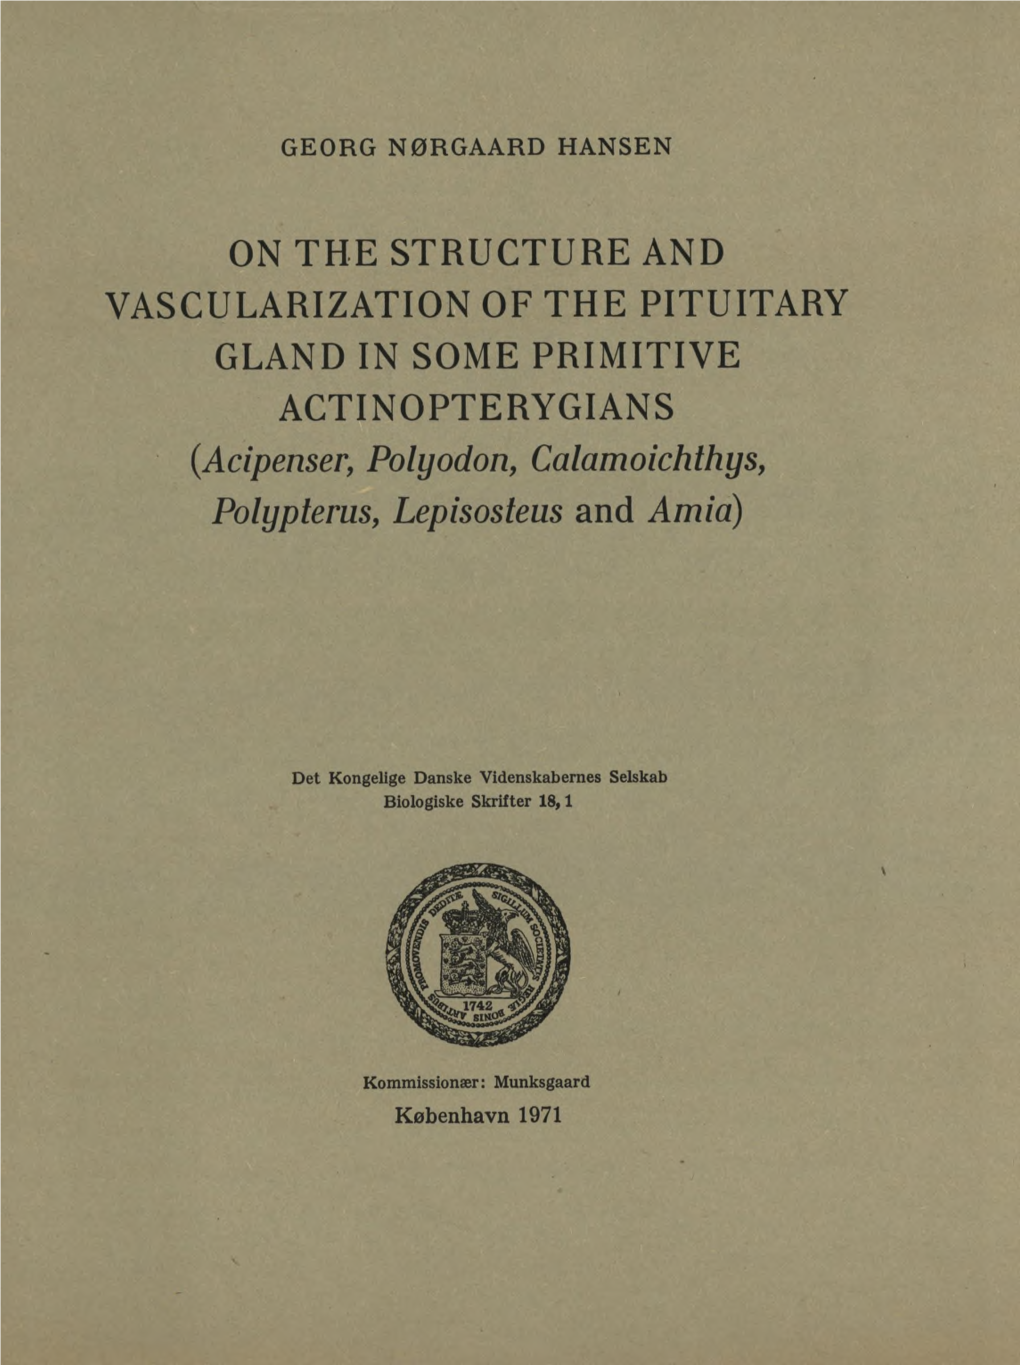 ON the STRUCTURE and VASCULARIZATION of the PITUITARY GLAND in SOME PRIMITIVE ACTINOPTERYGIANS (Acipenser, Polyodon, Calamoichthys, Polypterus, Lepisosteus and Amia)